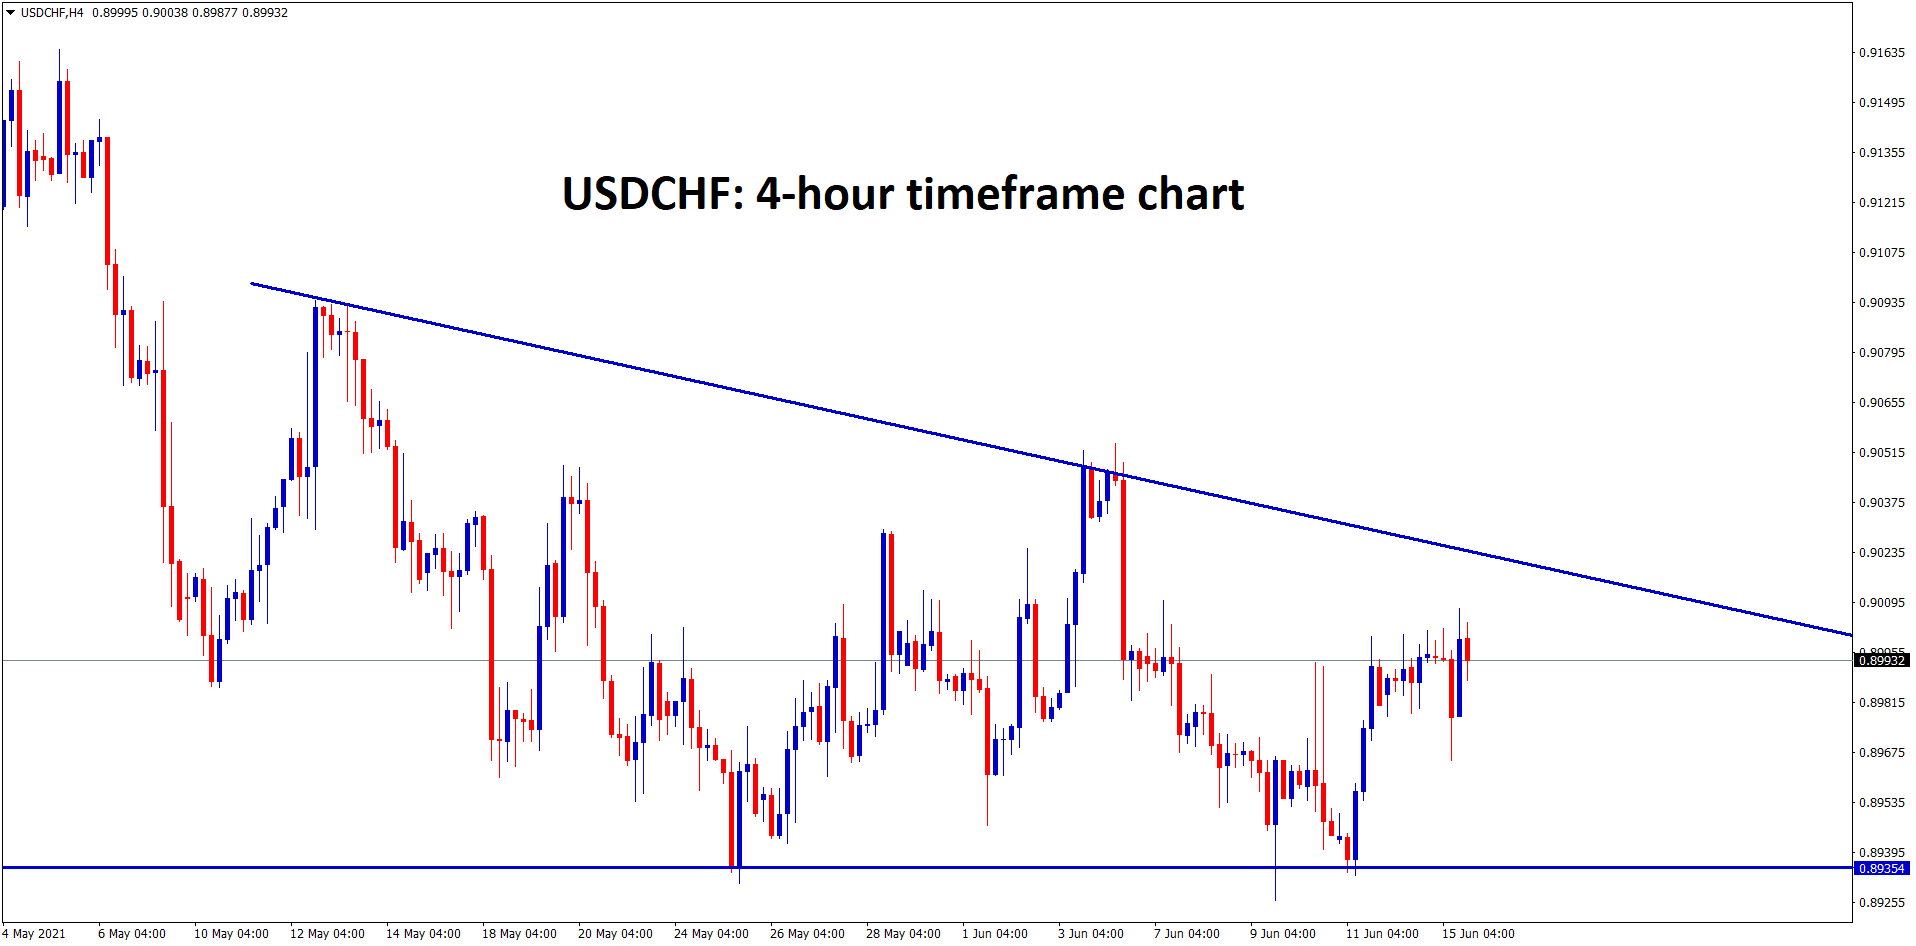 USDCHF is moving in a descending triangle wait for breakout from this triangle